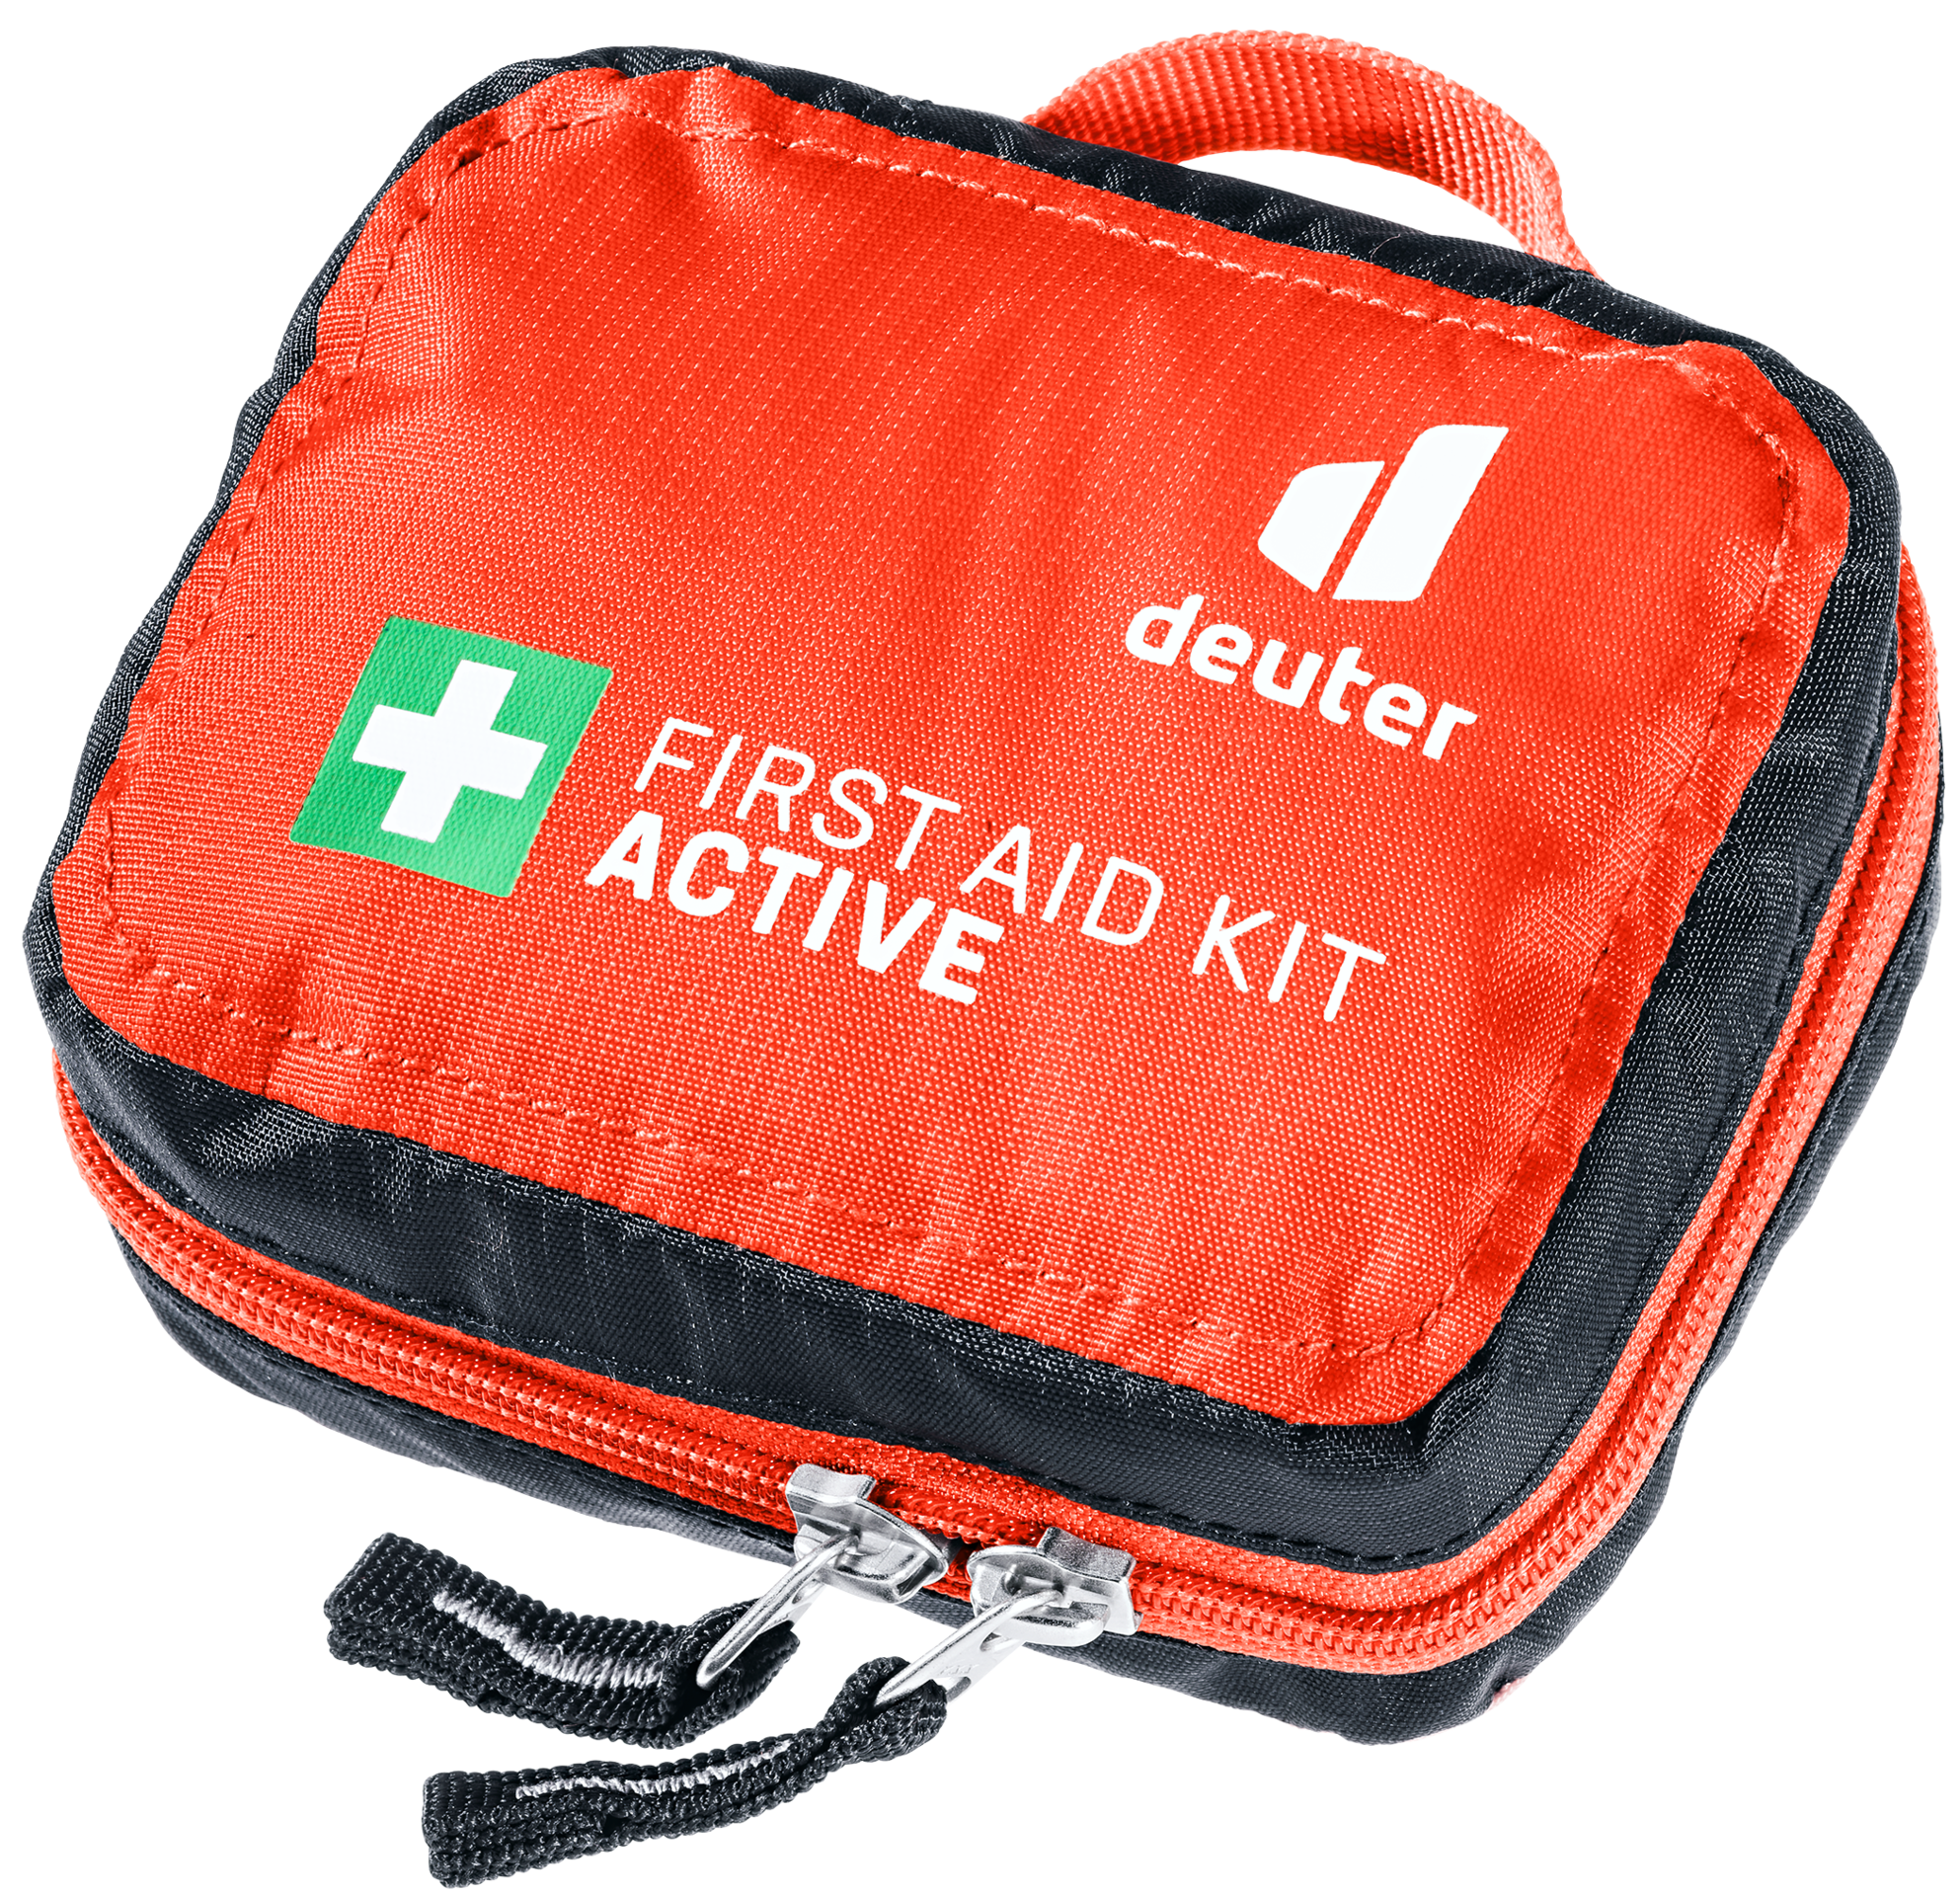 https://dk0fkjygbn9vu.cloudfront.net/cache-buster-11706829741/deuter/mediaroom/product-images/accessories/first-aid-kits/140331/image-thumb__140331__deuter_lightbox-img/3970023-9002-FirstAidKitActive_papaya-D-00.png